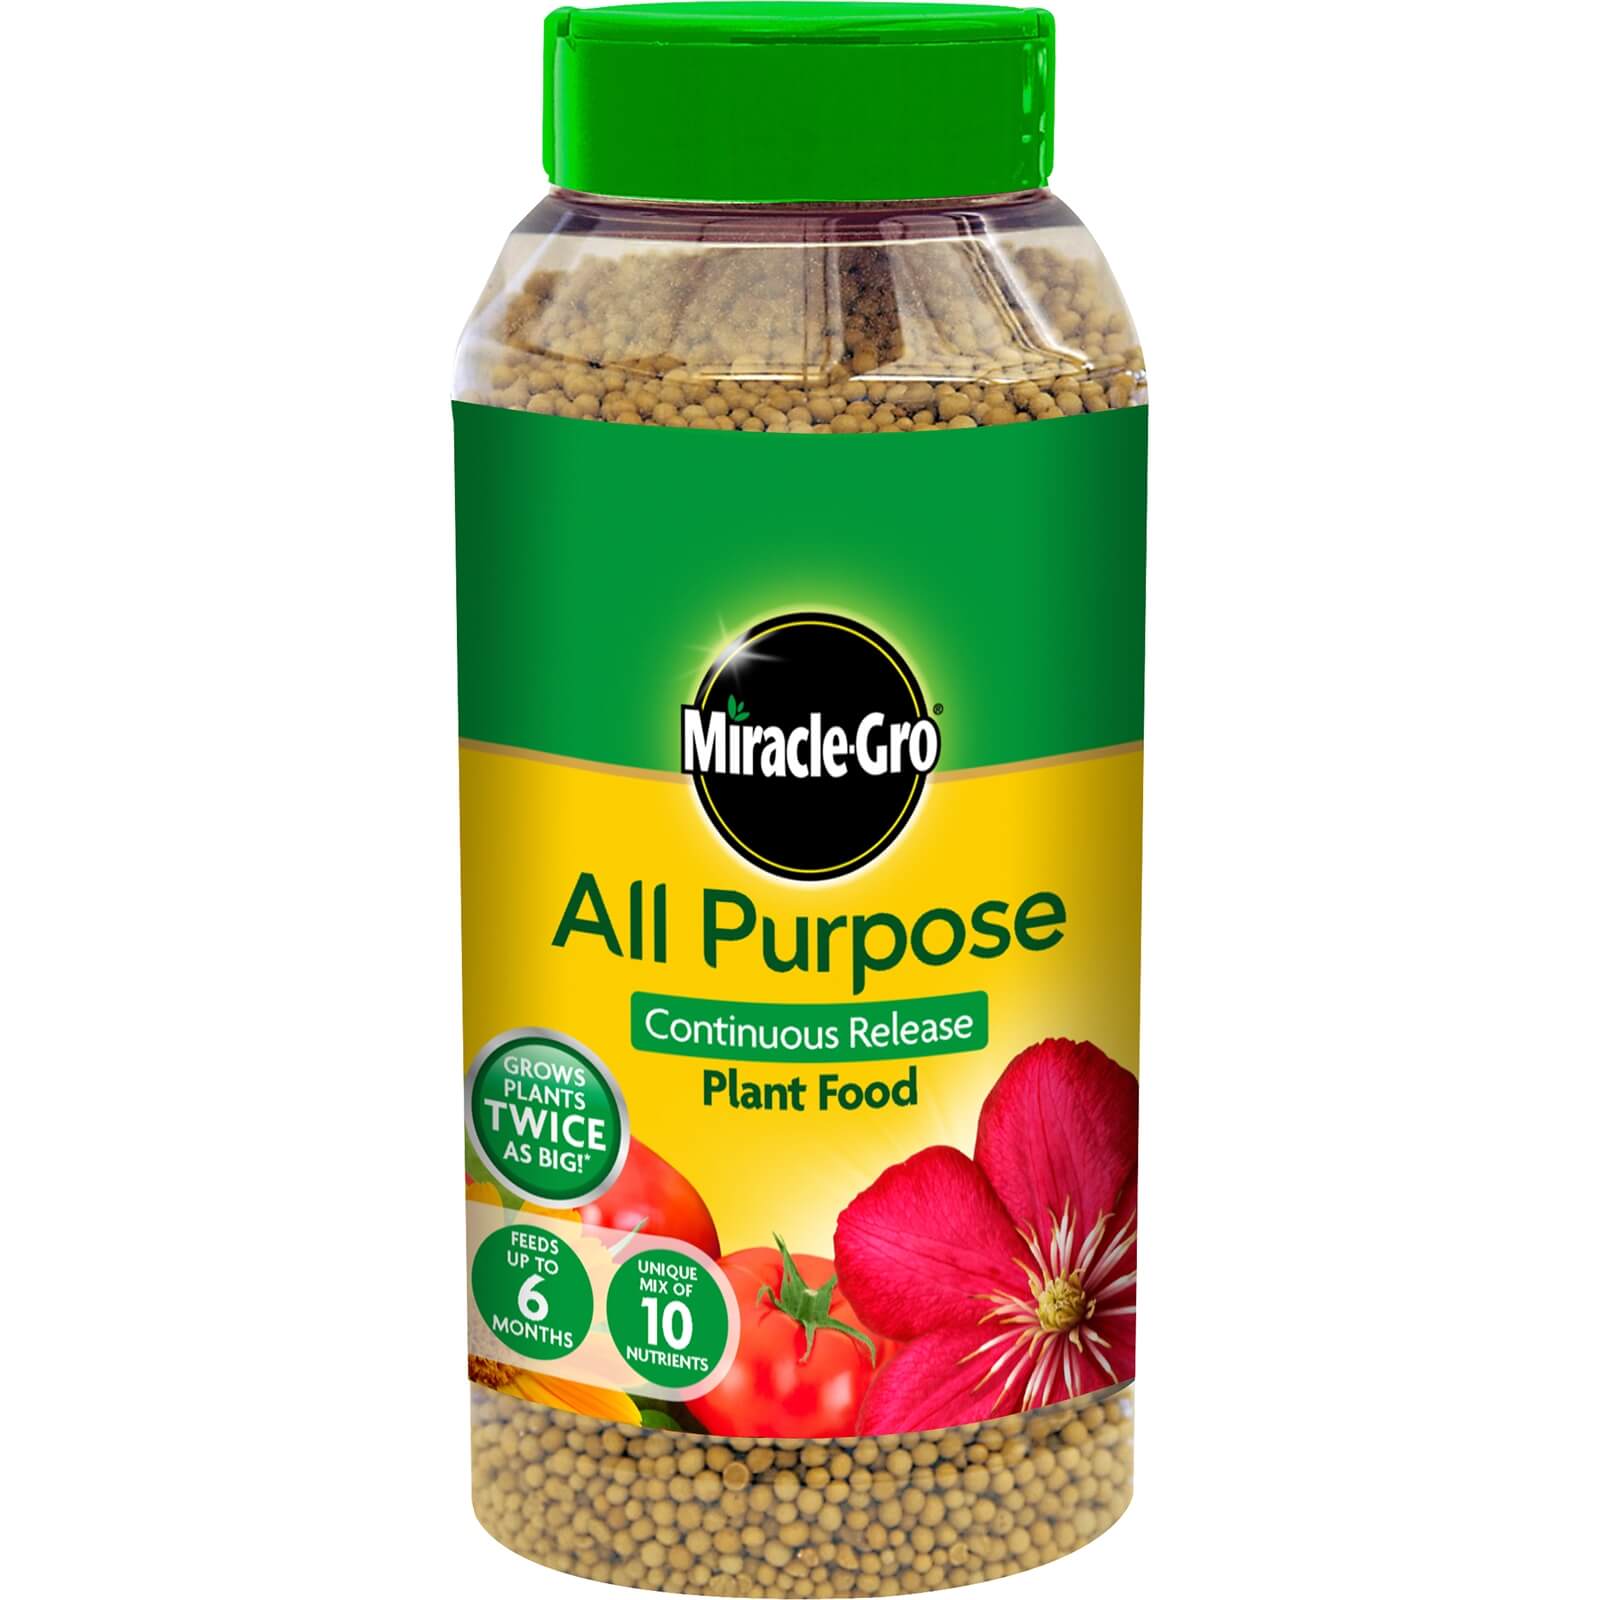 Miracle-Gro All Purpose Continuous Release Plant Food - 1kg